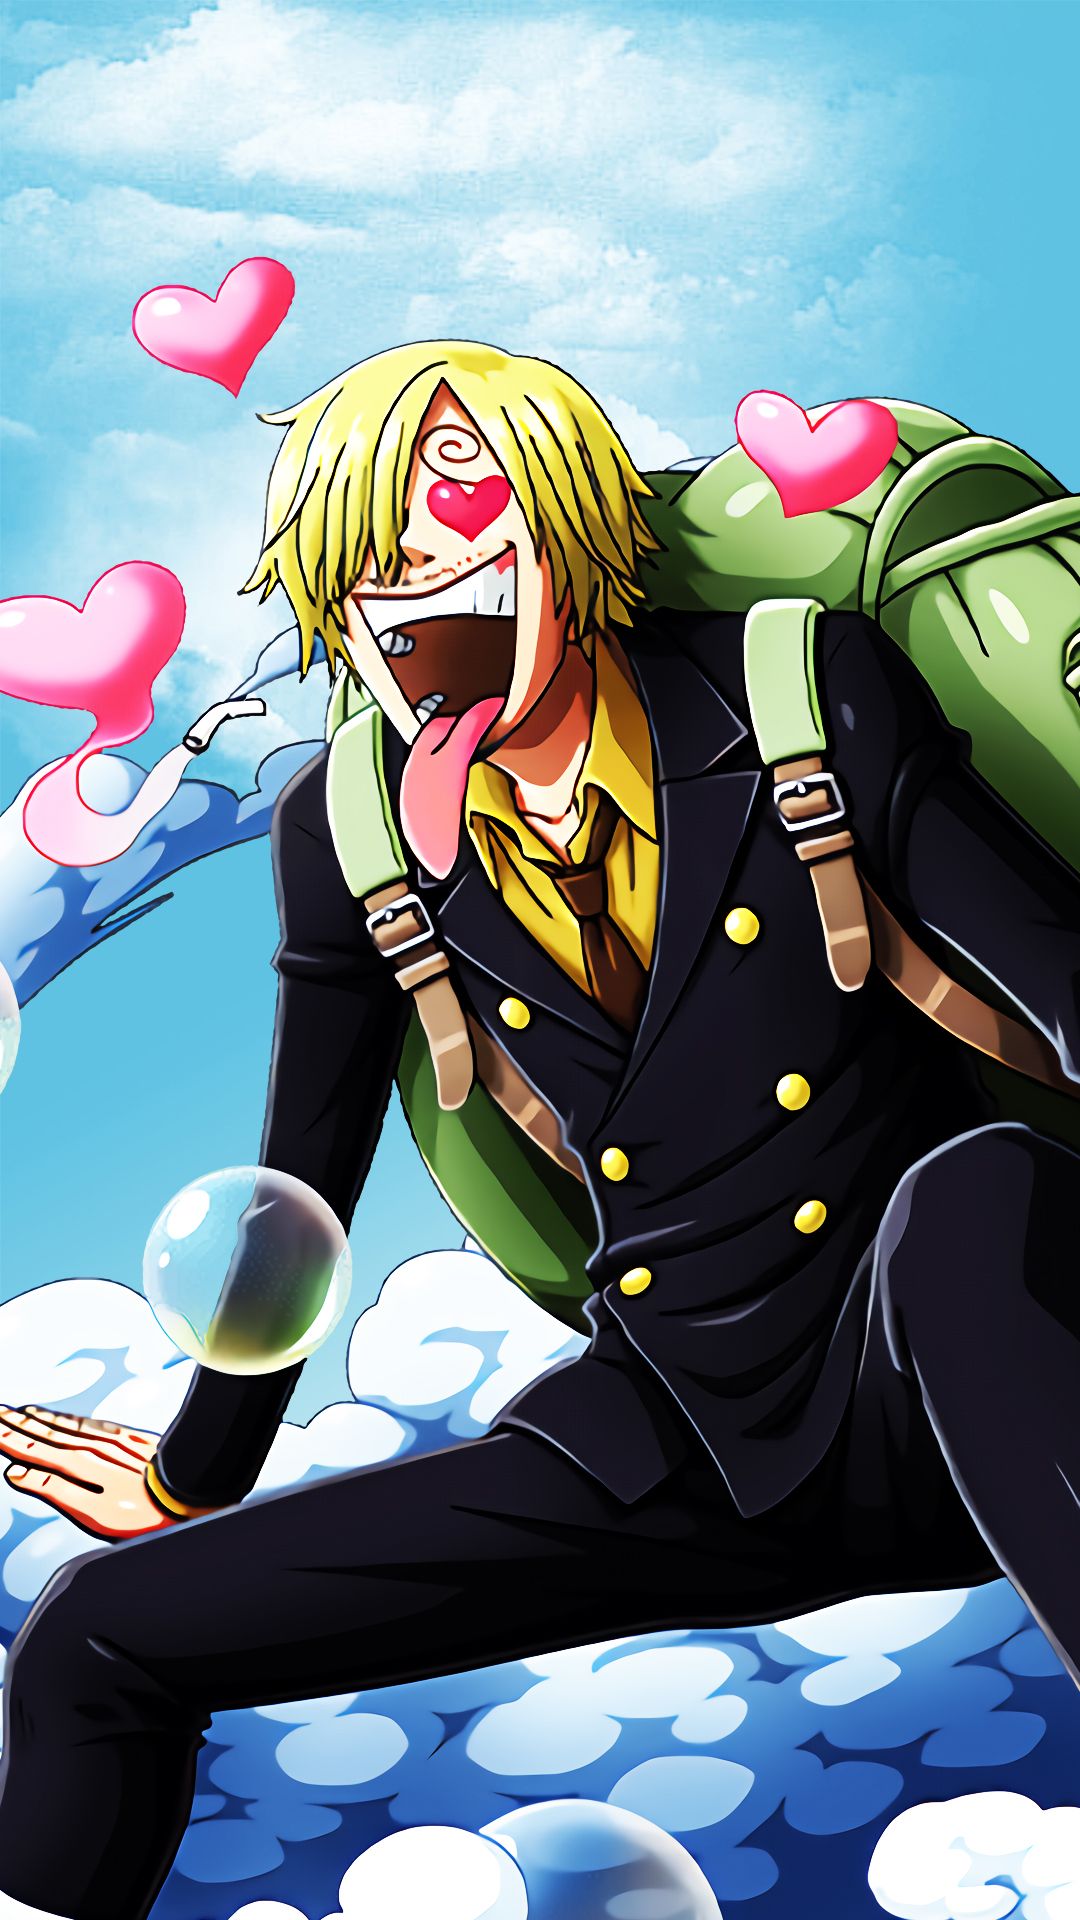 One Piece’s Sanji Gets Funny Easter Egg In Jump Force.